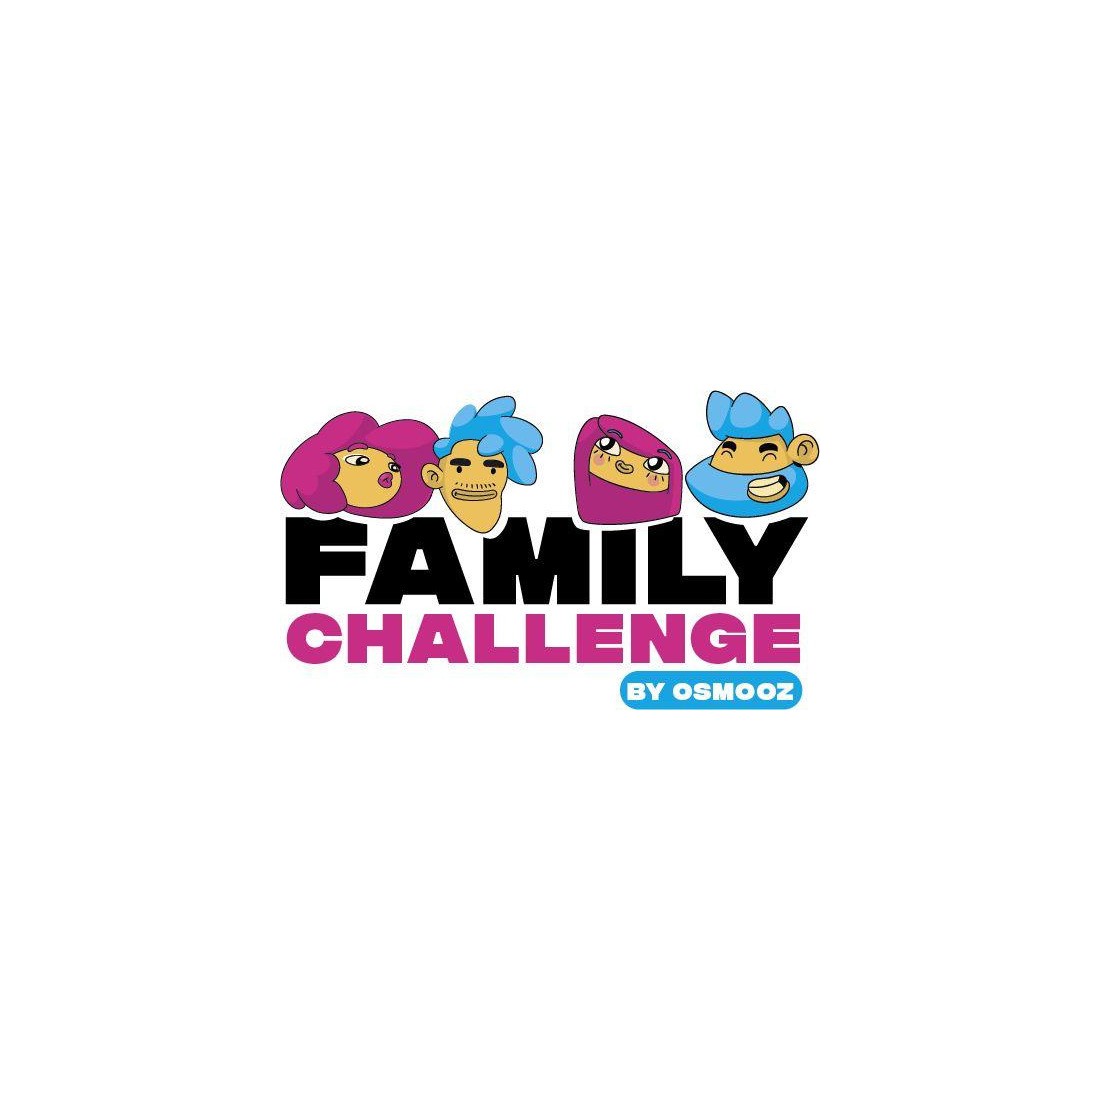 ATM Jeu d'ambiance ATM Gaming Family Challenge by Osmooz pas cher 